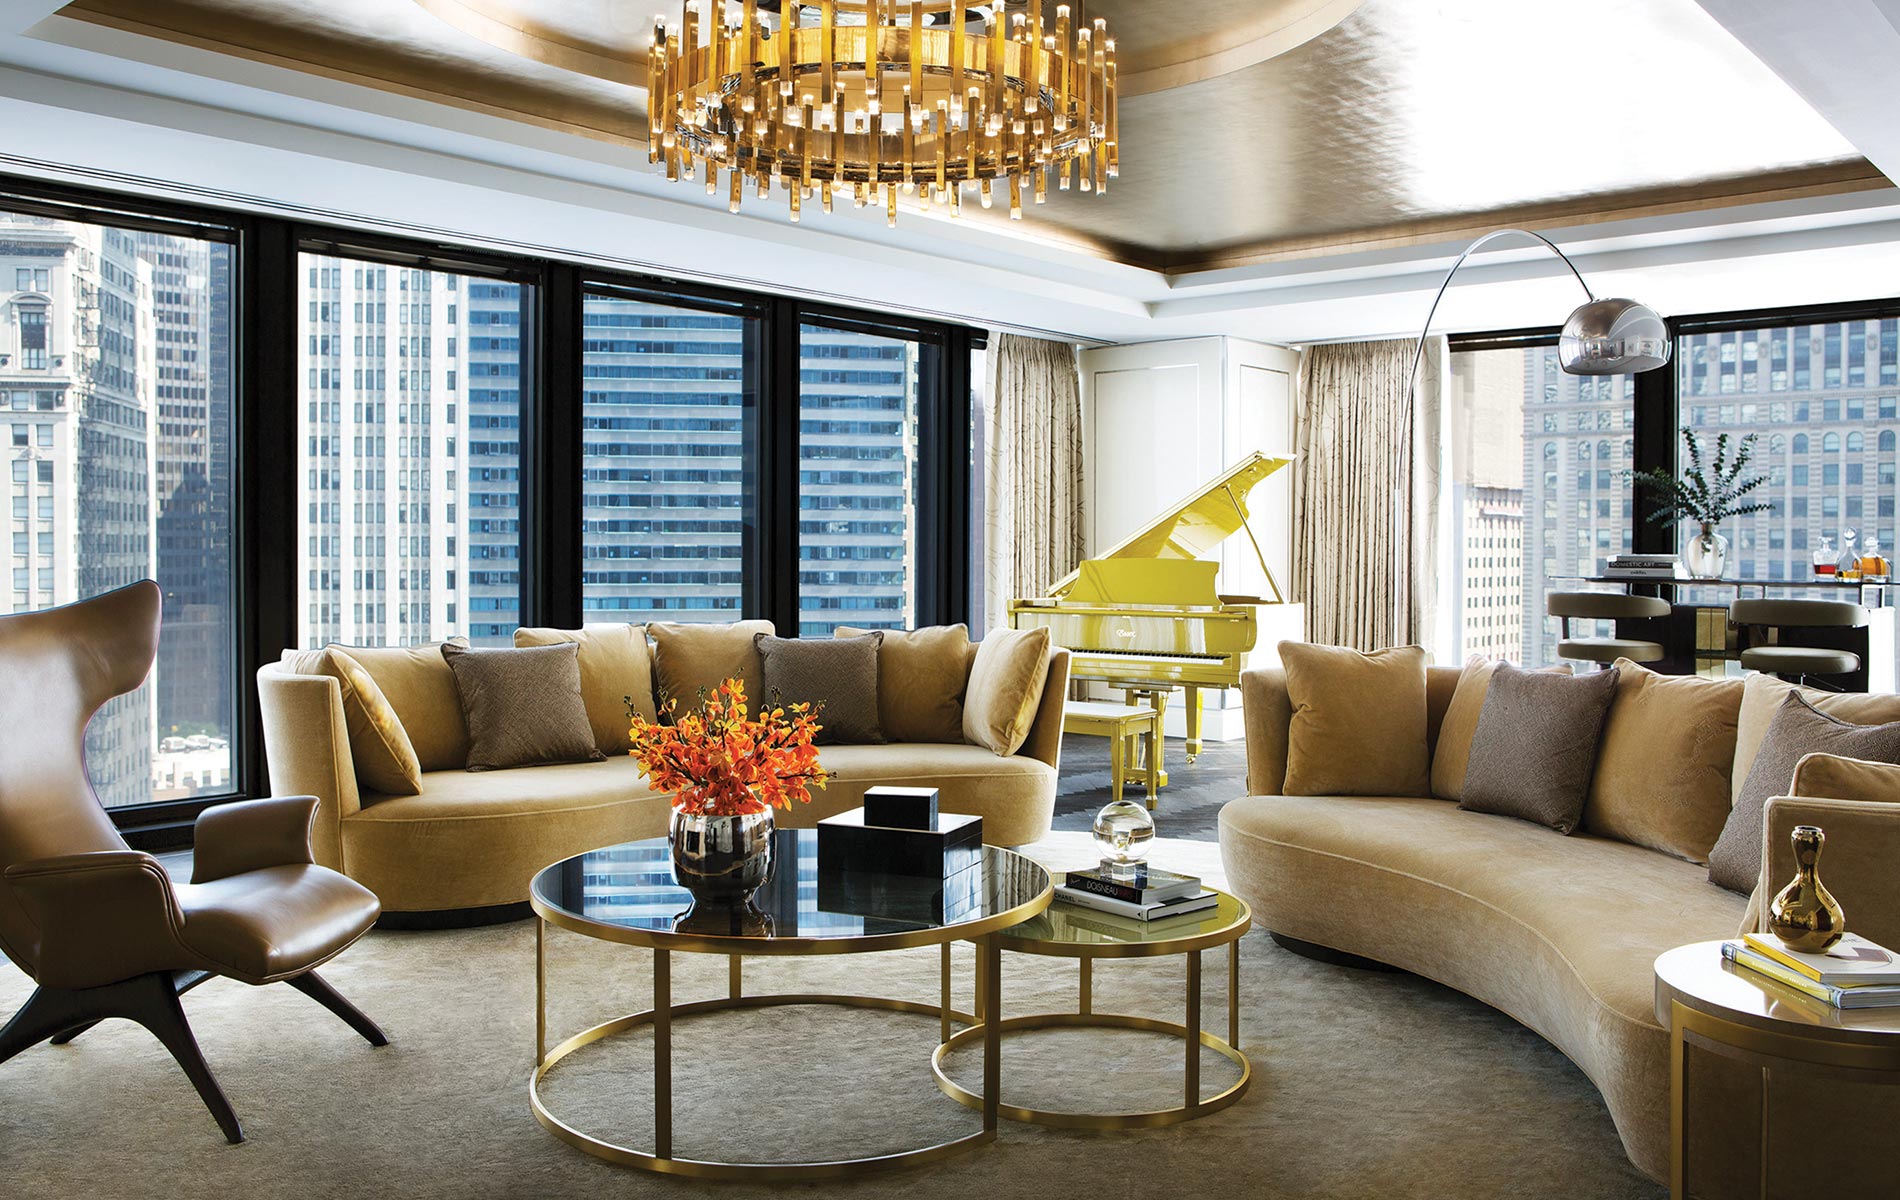 Luxury continues in every guest room, suite, dining space, and common area of the hotel, balancing Mies’s impeccable design and the Langham’s reputation for decadence.